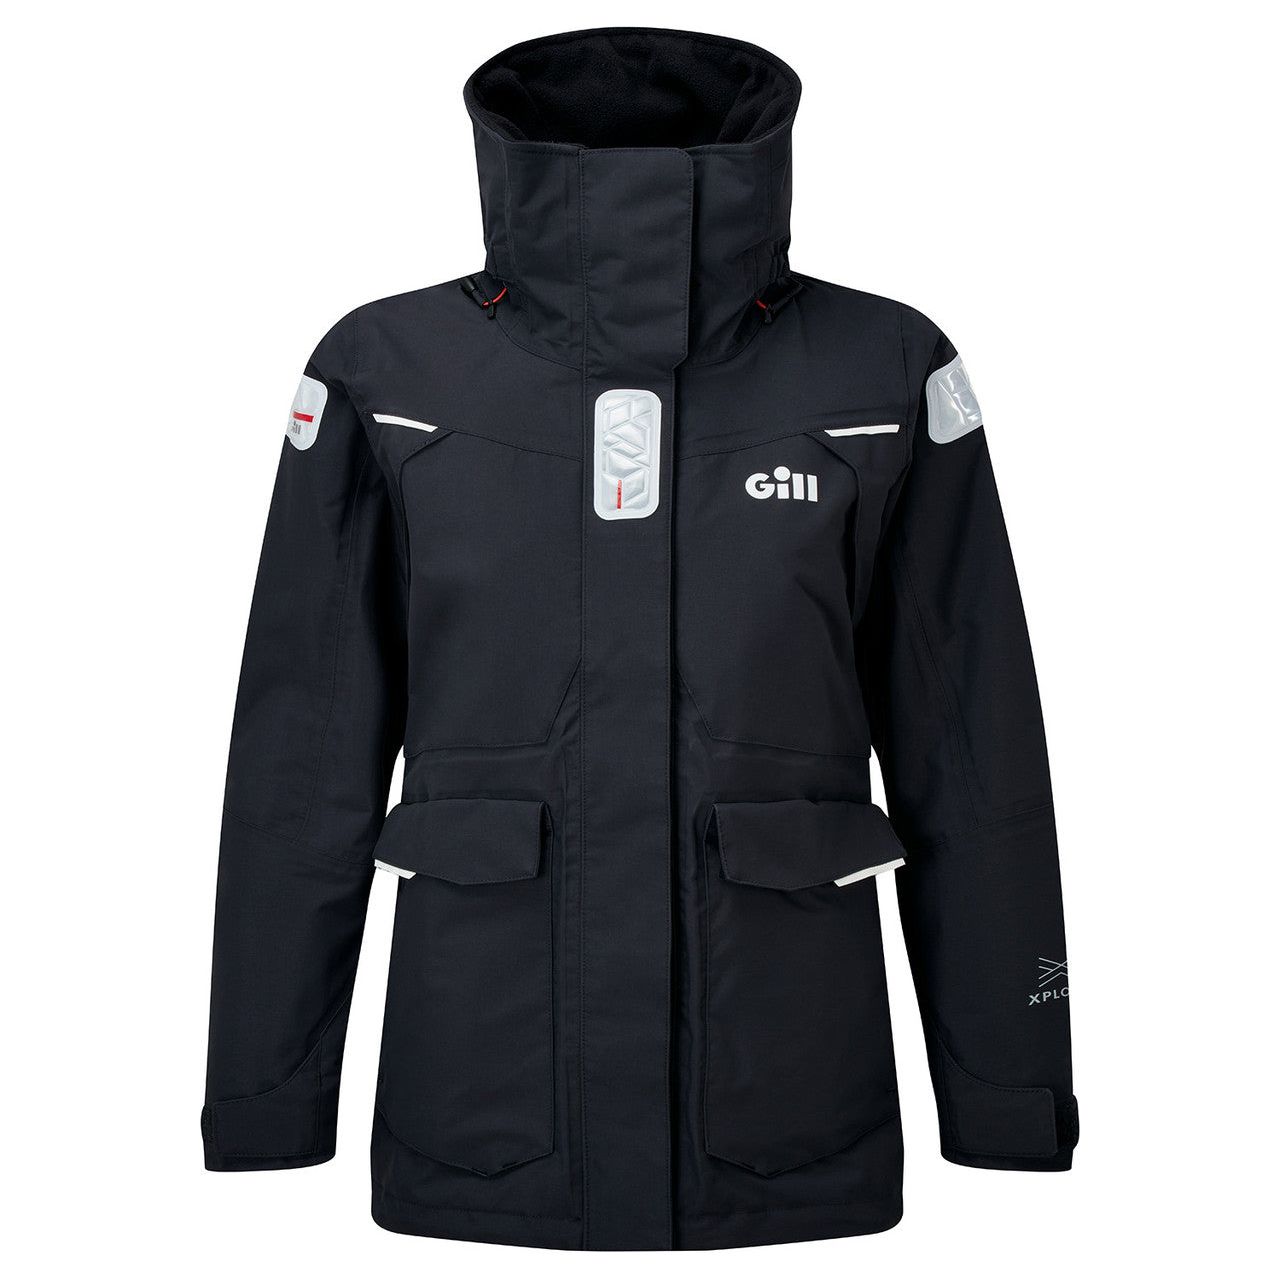 Gill Women's OS2 Offshore Jacket Graphite Size 12